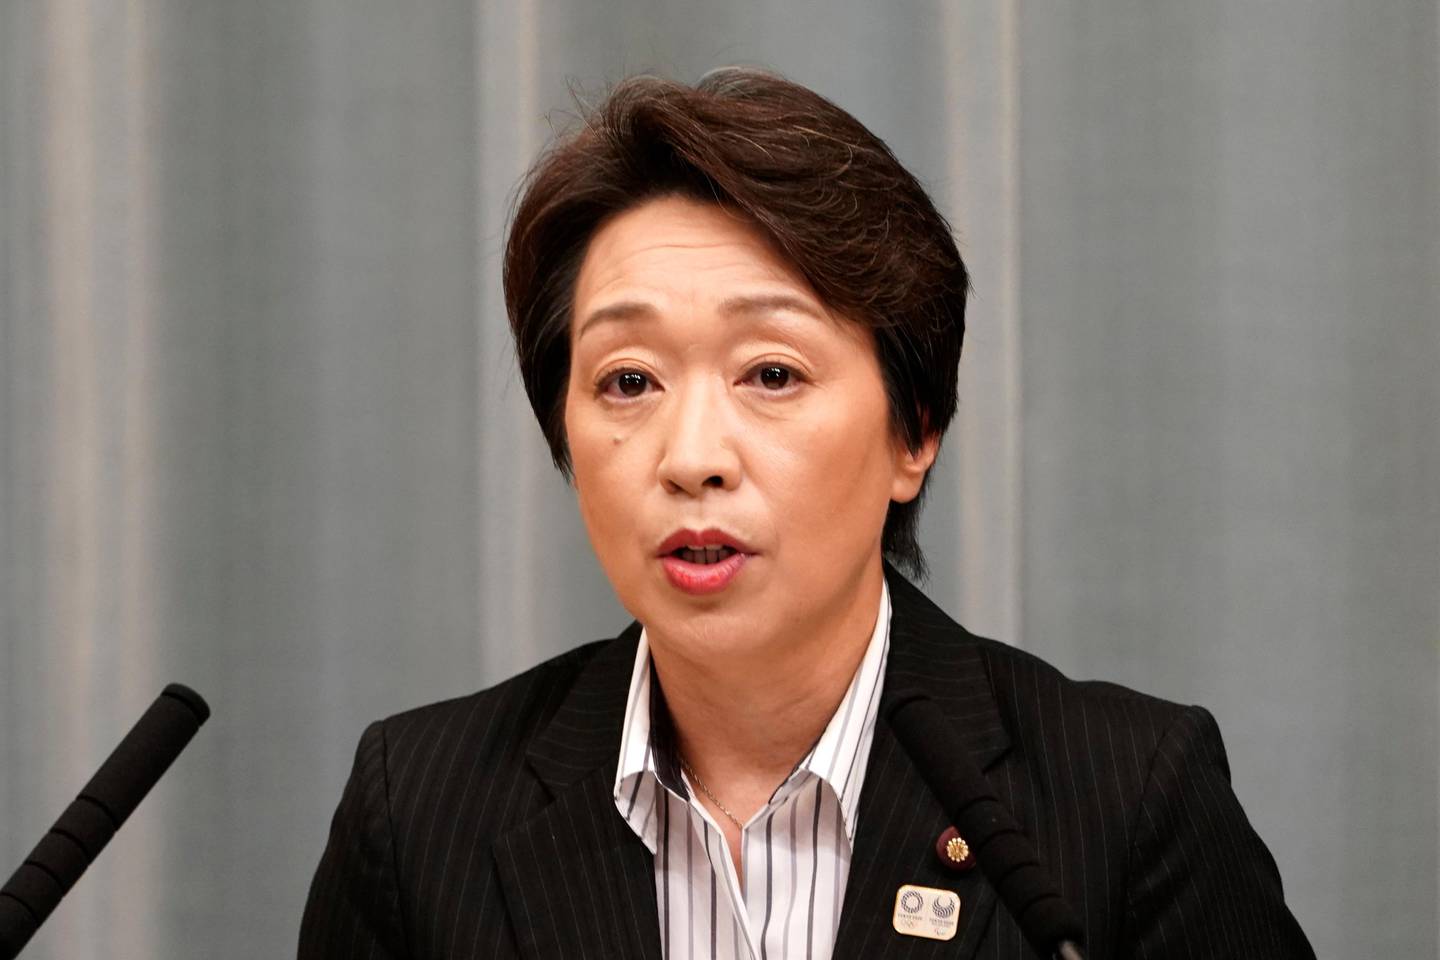 Newly appointed Minister in charge of the Tokyo Olympic and Paralympic Games and ?Minister in charge of women's empowerment Seiko Hashimoto speaks during a press conference at the prime minister's official residence in Tokyo Wednesday, Sept. 11, 2019. Japanese Prime Minister Shinzo Abe has shuffled his Cabinet, adding two women and a son of a former leader to freshen his image while maintaining continuity on U.S.-oriented trade and security policies. (AP Photo/Eugene Hoshiko)